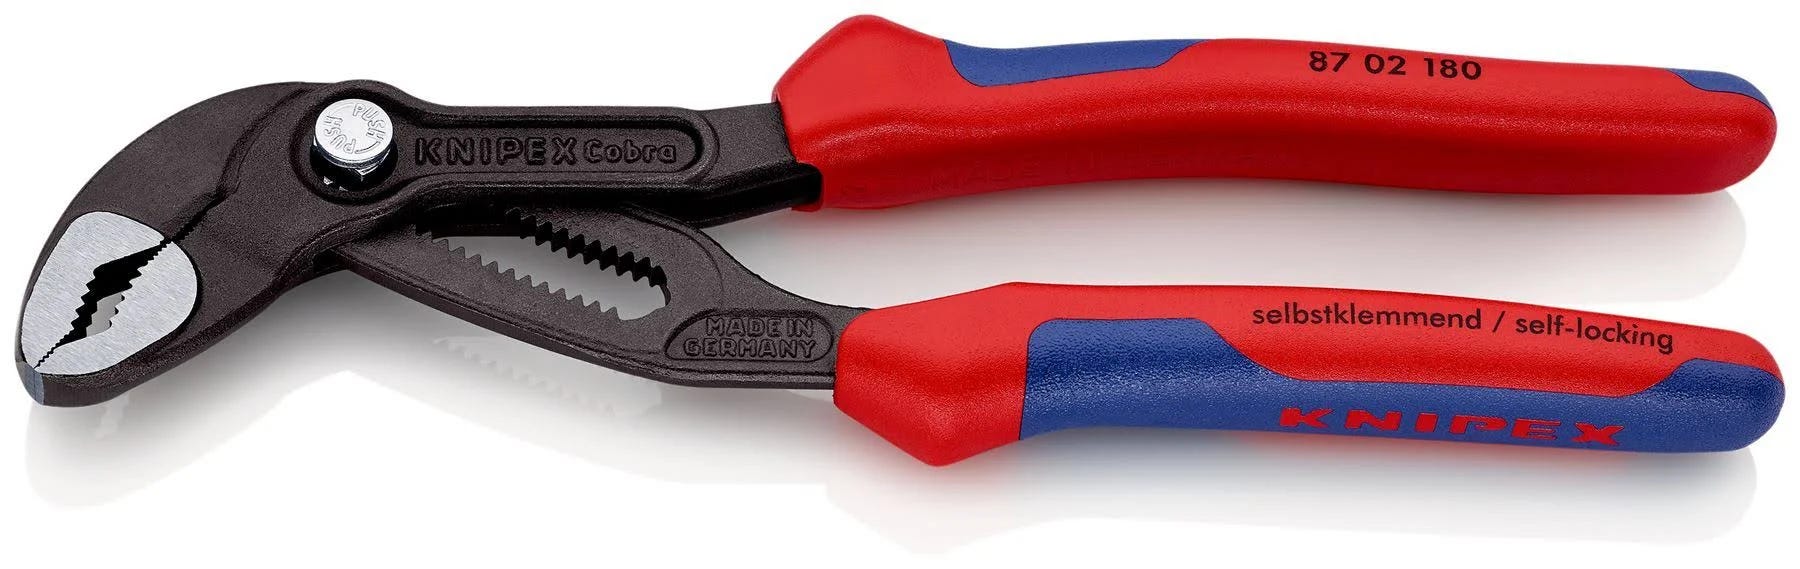 Knipex Cobra 180mm Water Pump Pliers with Self-Locking and Chrome Vanadium Steel Construction | Image